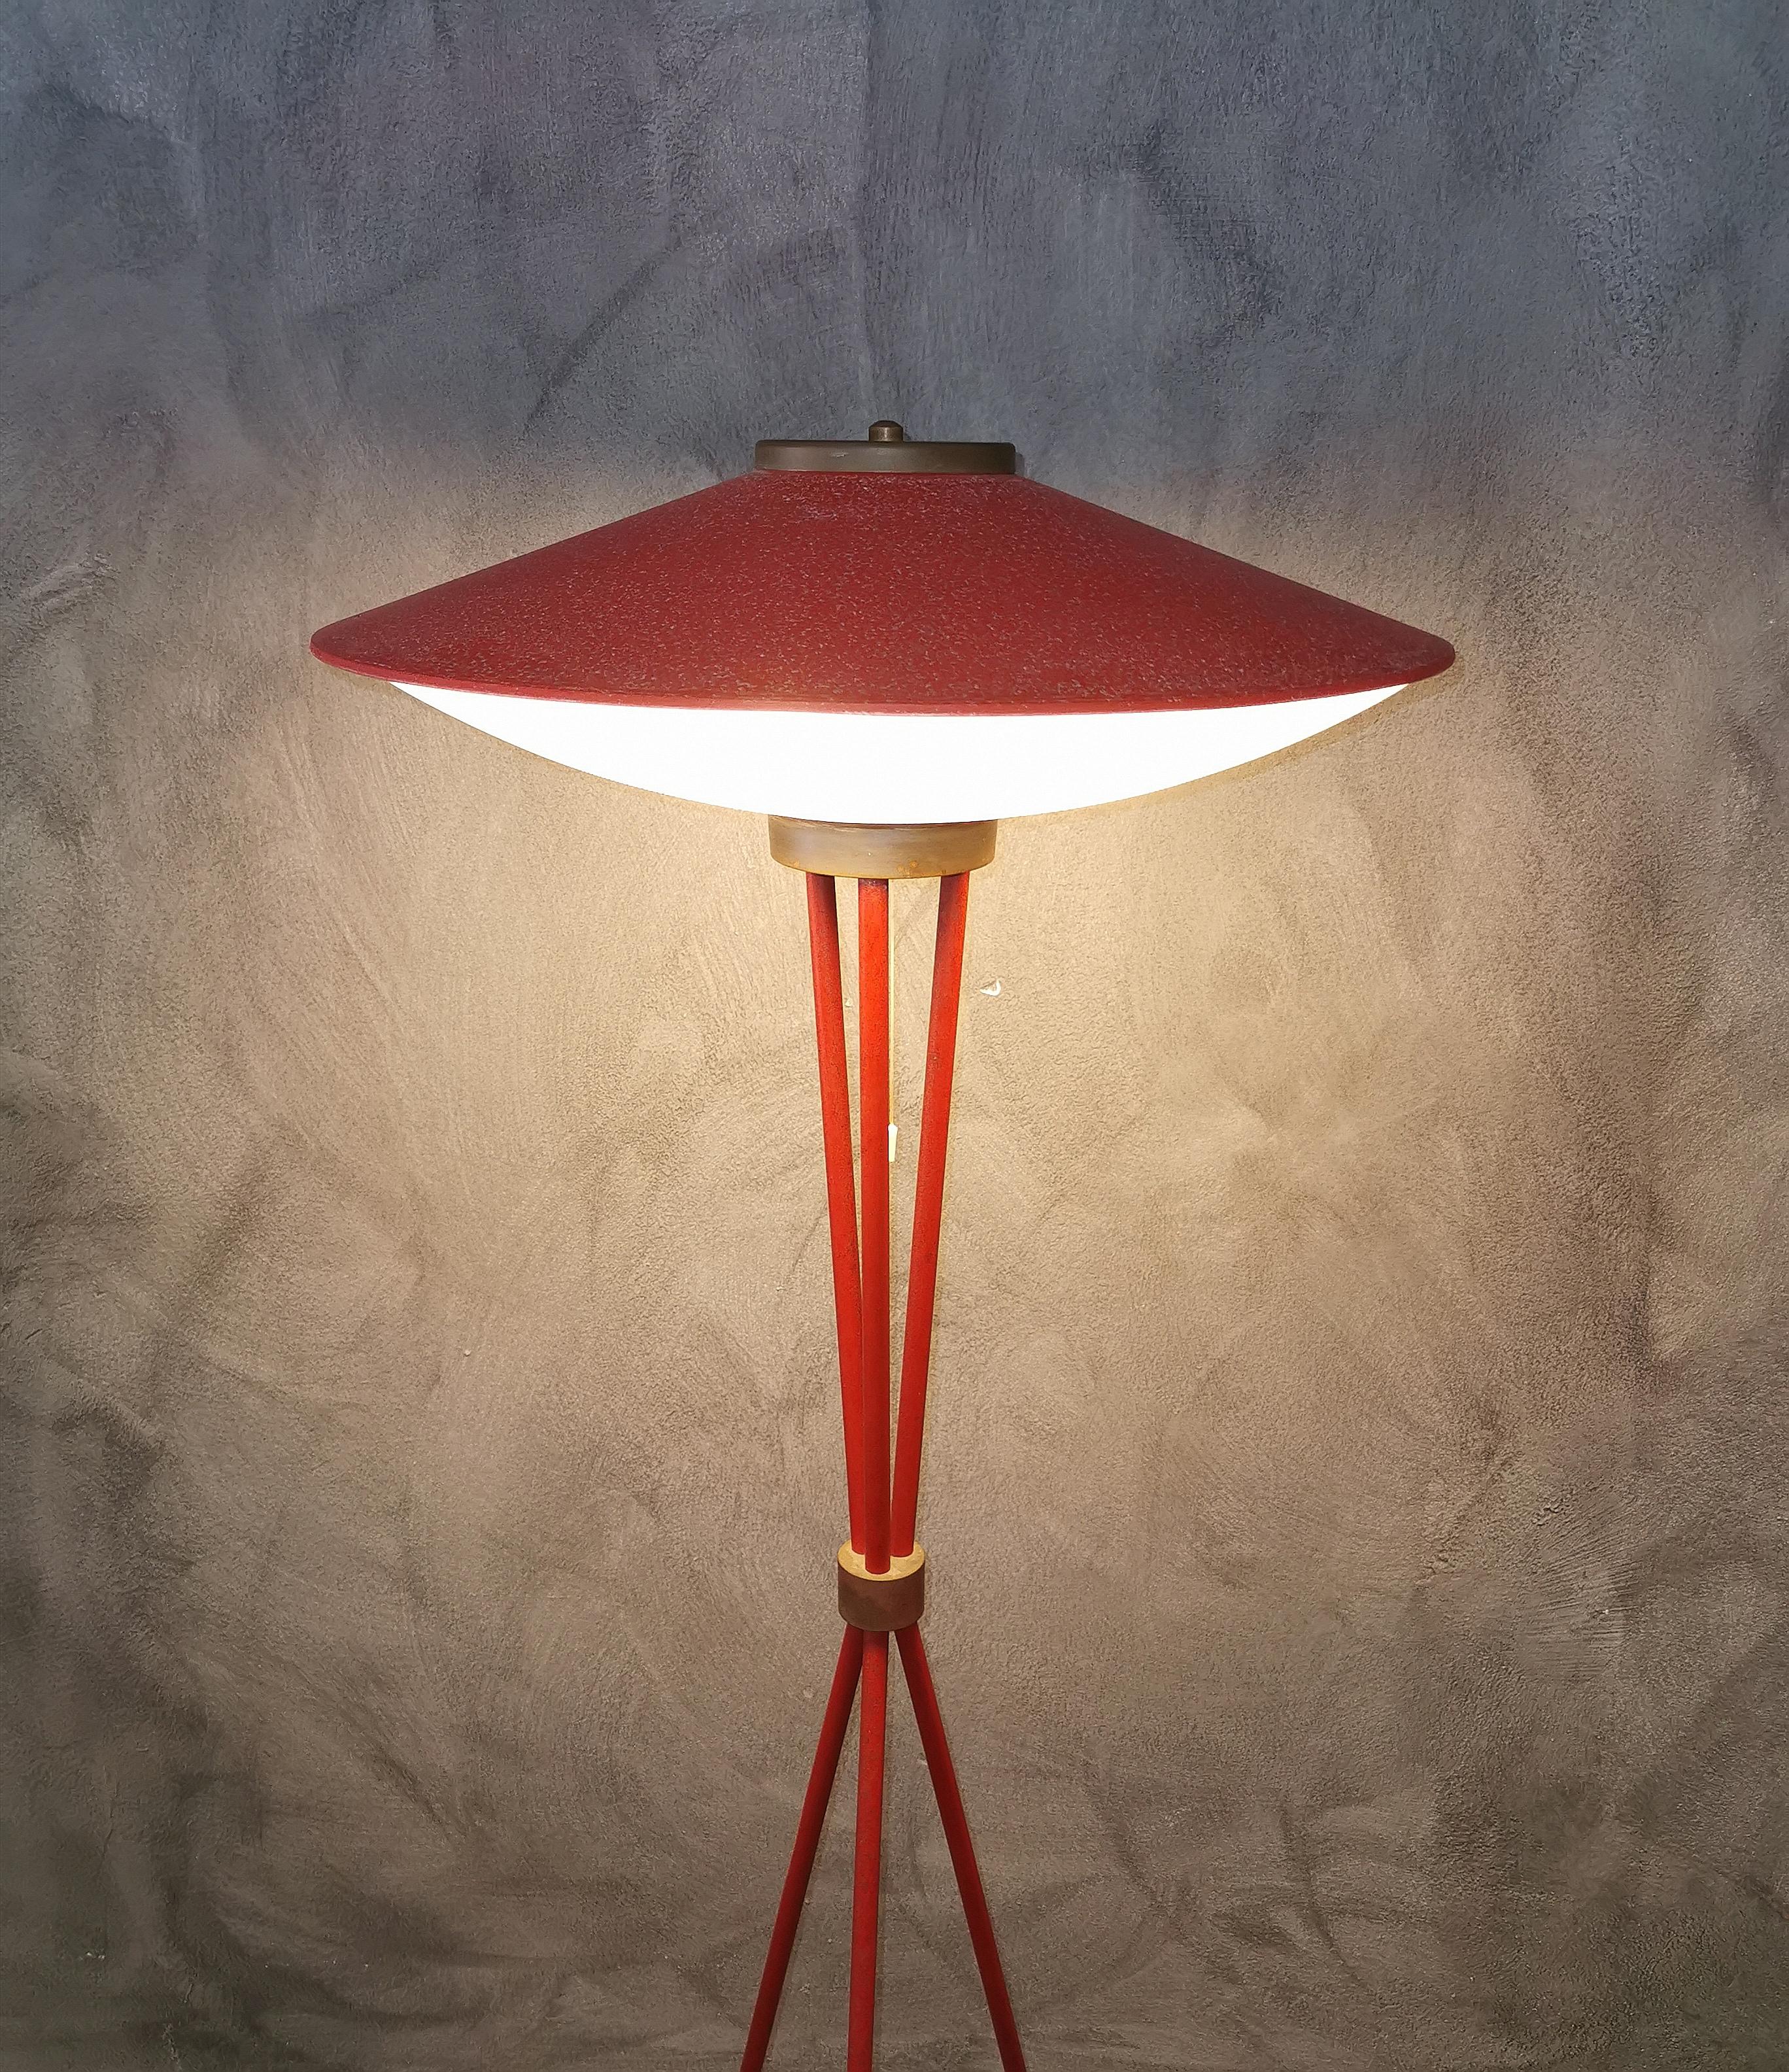 Rare and unique 3-light tripod floor lamp designed and produced by Stilnovo in 1955, diffuser formed by a lower part in satin glass and an upper part in red lacquered aluminum with definitions in brass and feet in red lacquered metal. Italian design.